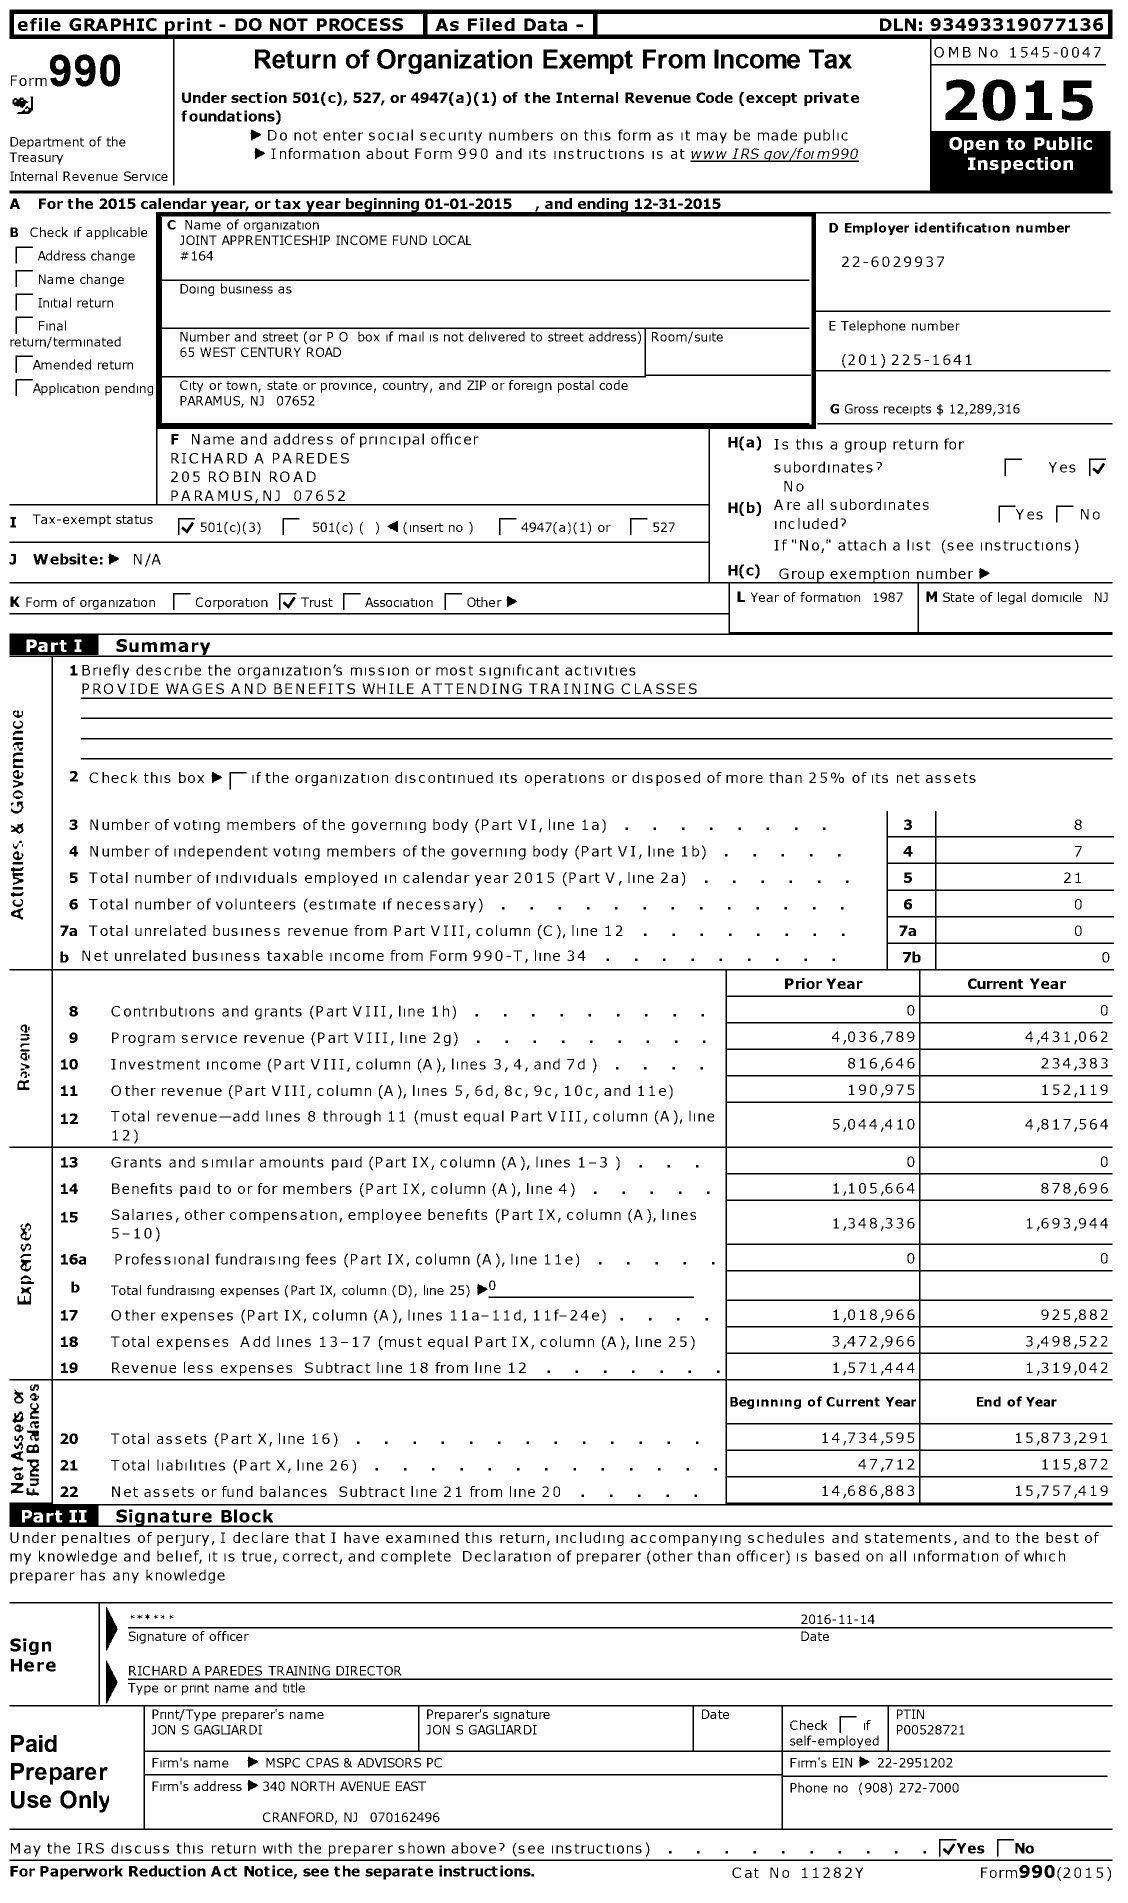 Image of first page of 2015 Form 990 for Joint Apprenticeship Training Fund of Local Union #164